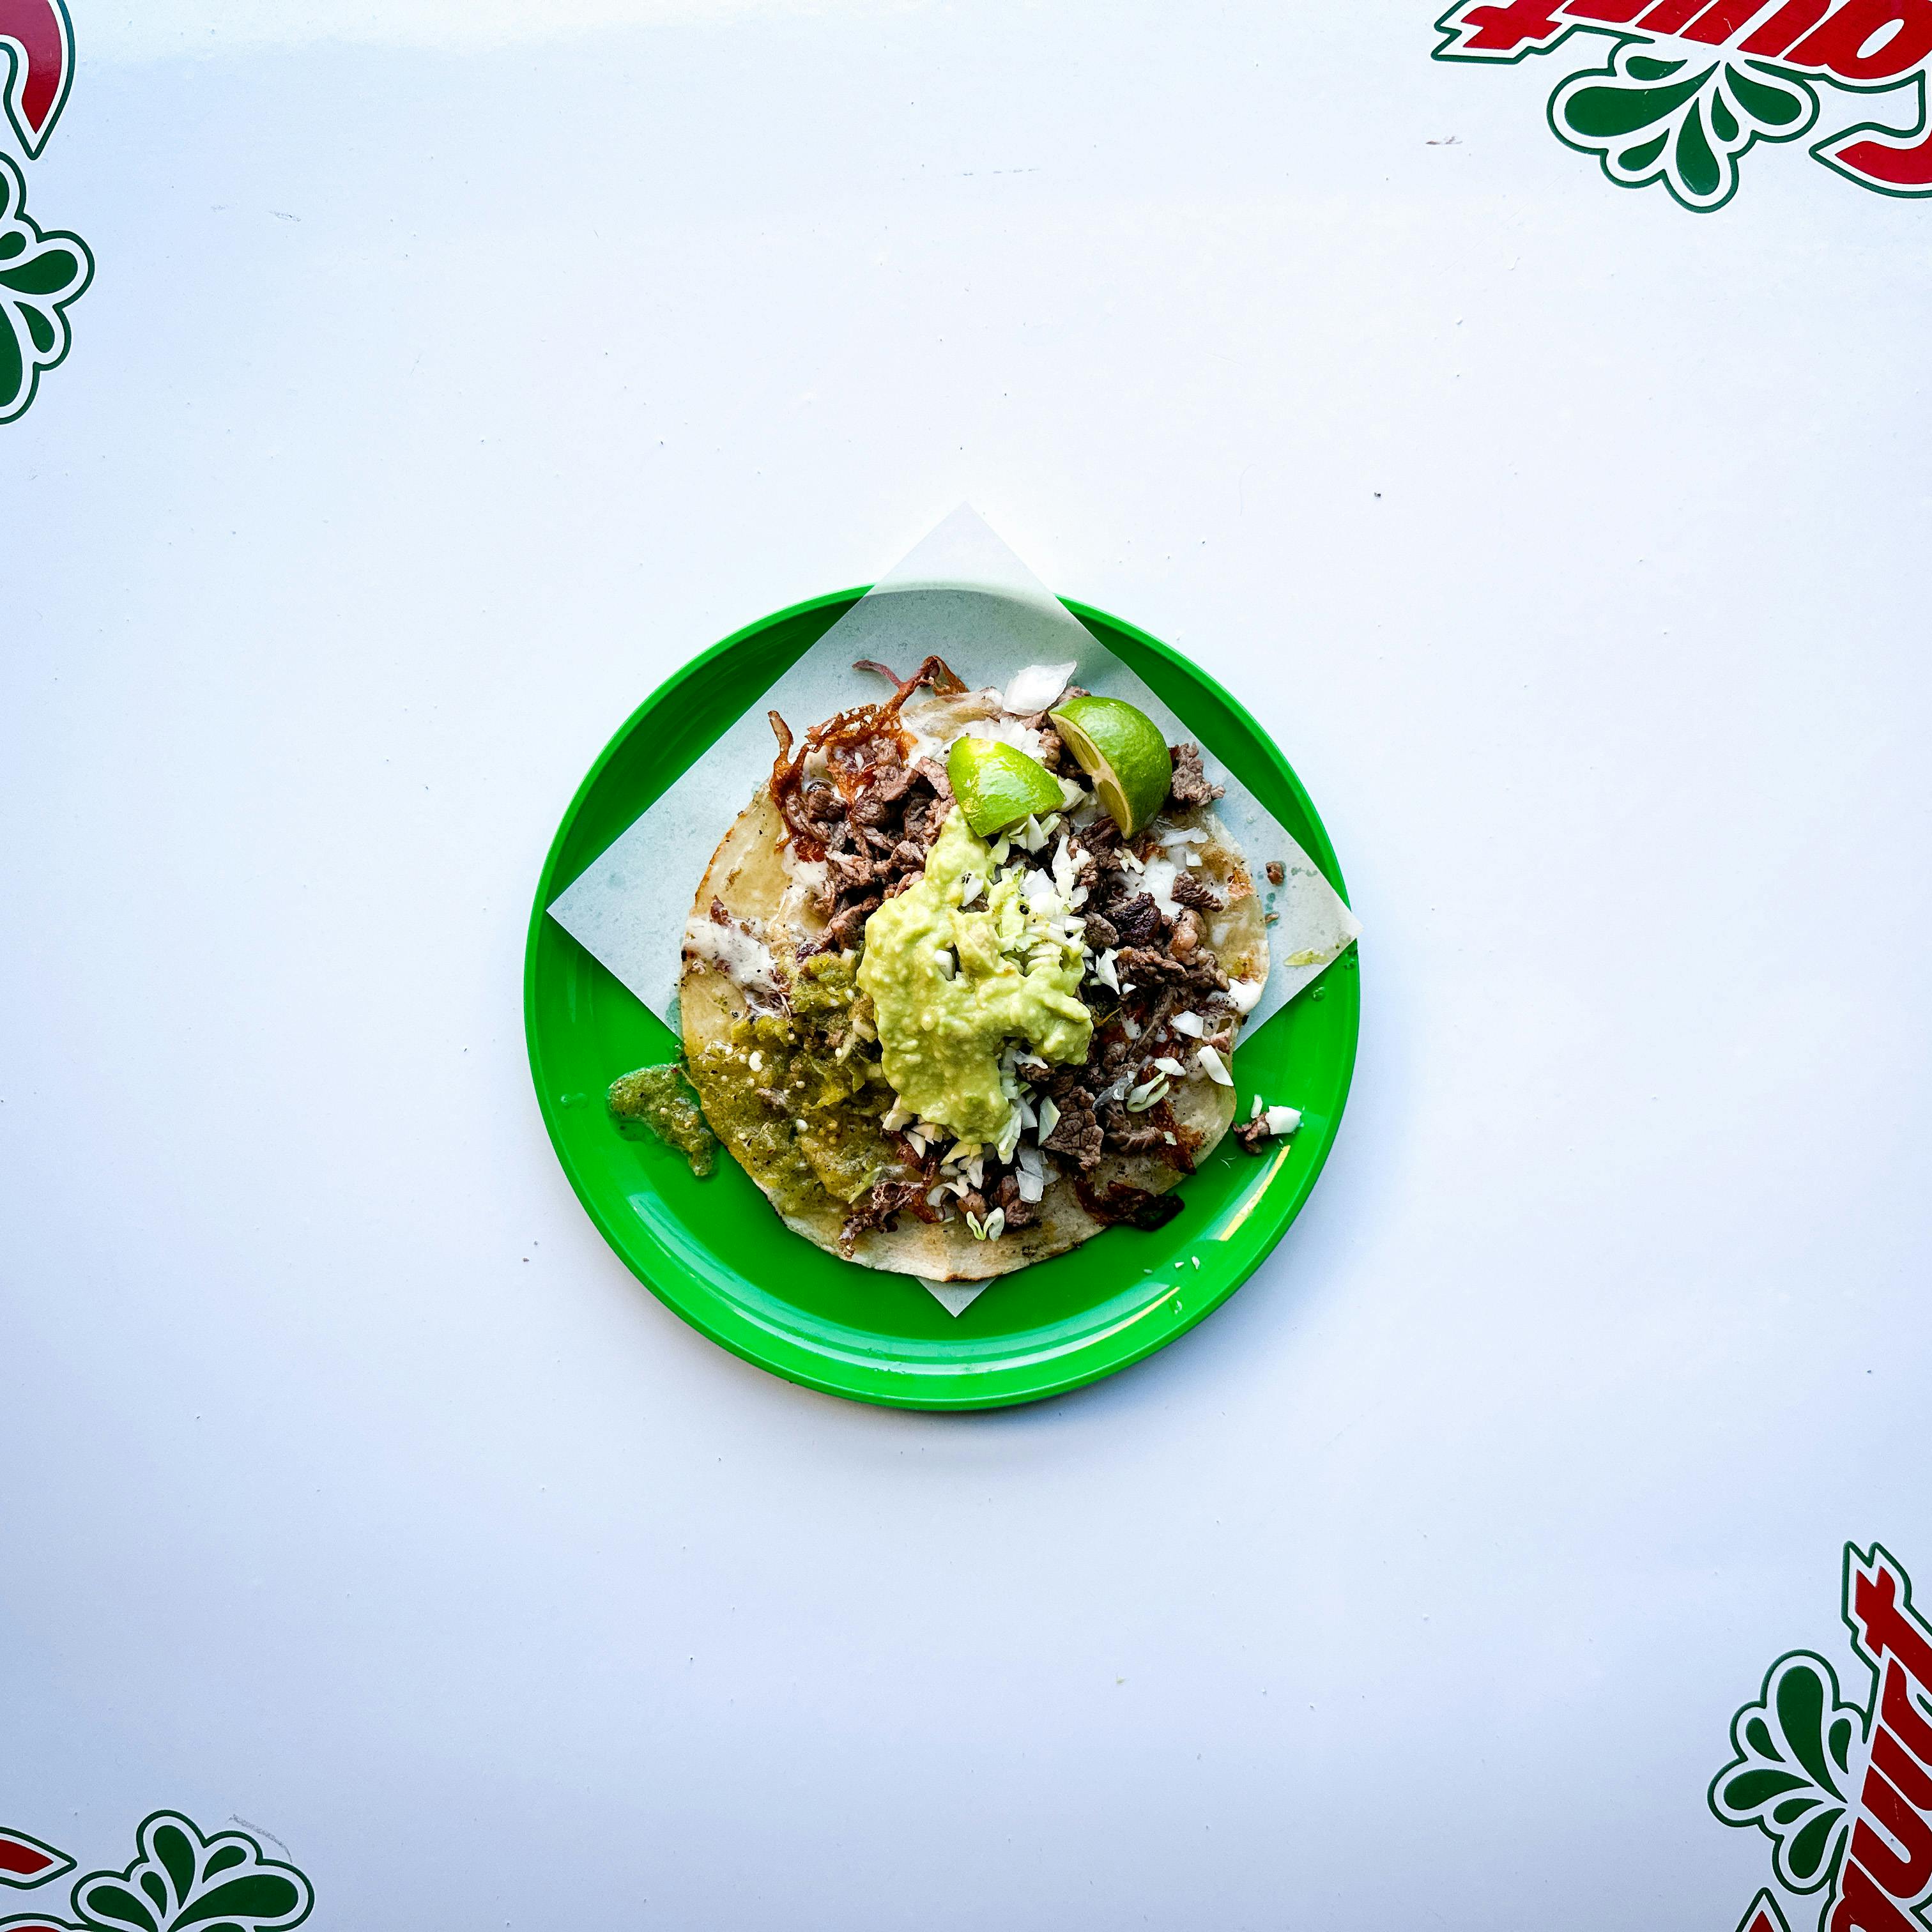 Image of food from Tacos El Ultimo Baile